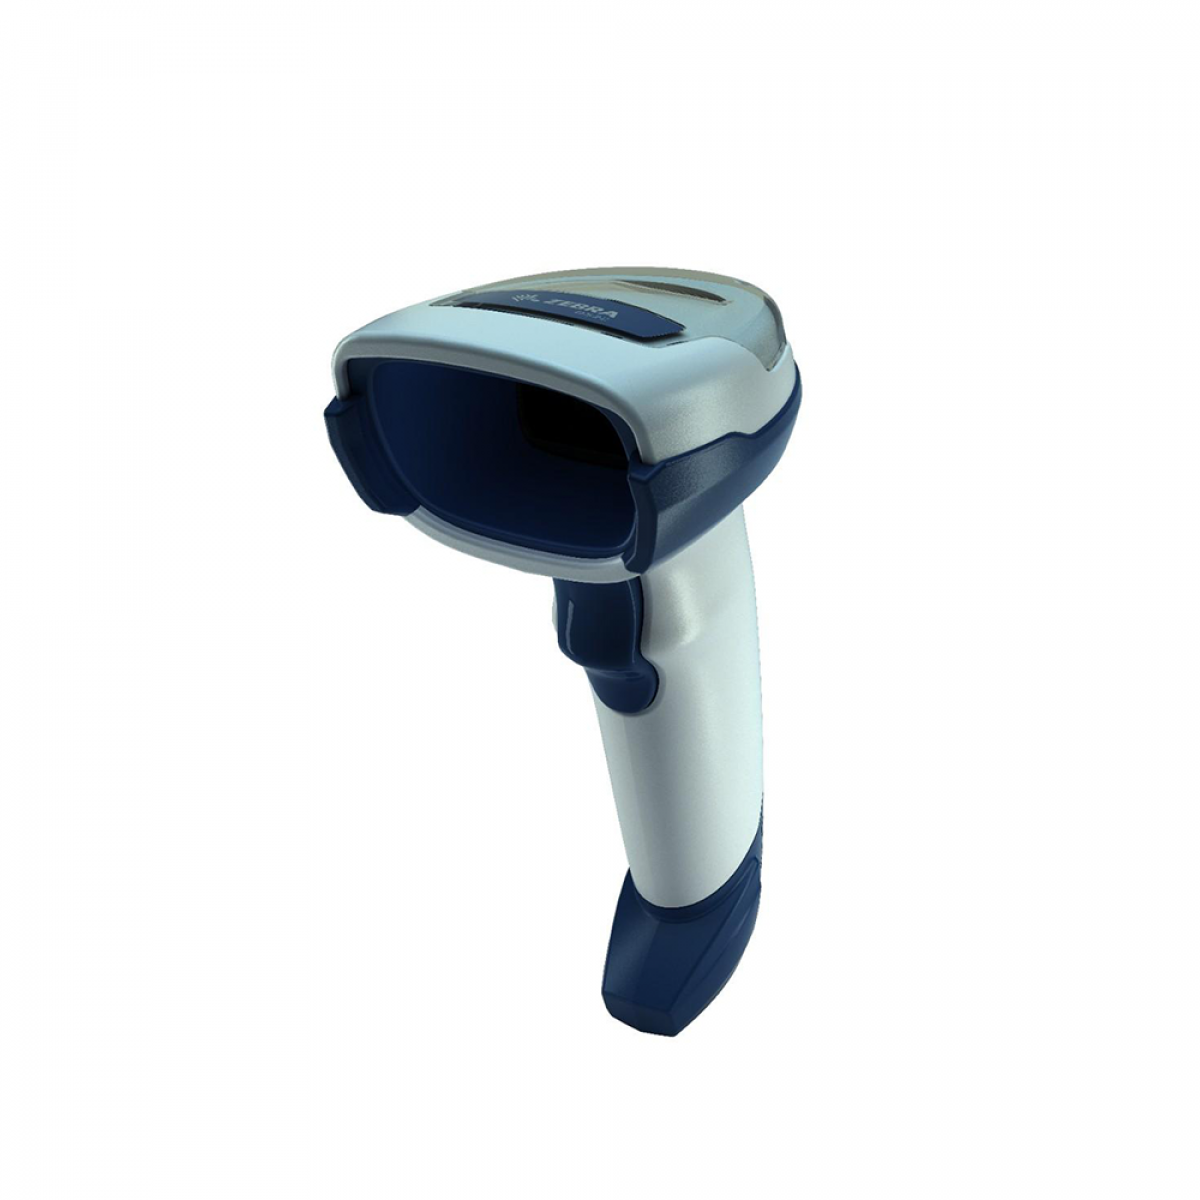 Zebra DS2200 Series ds2208-hc barcode scanner for healthcare